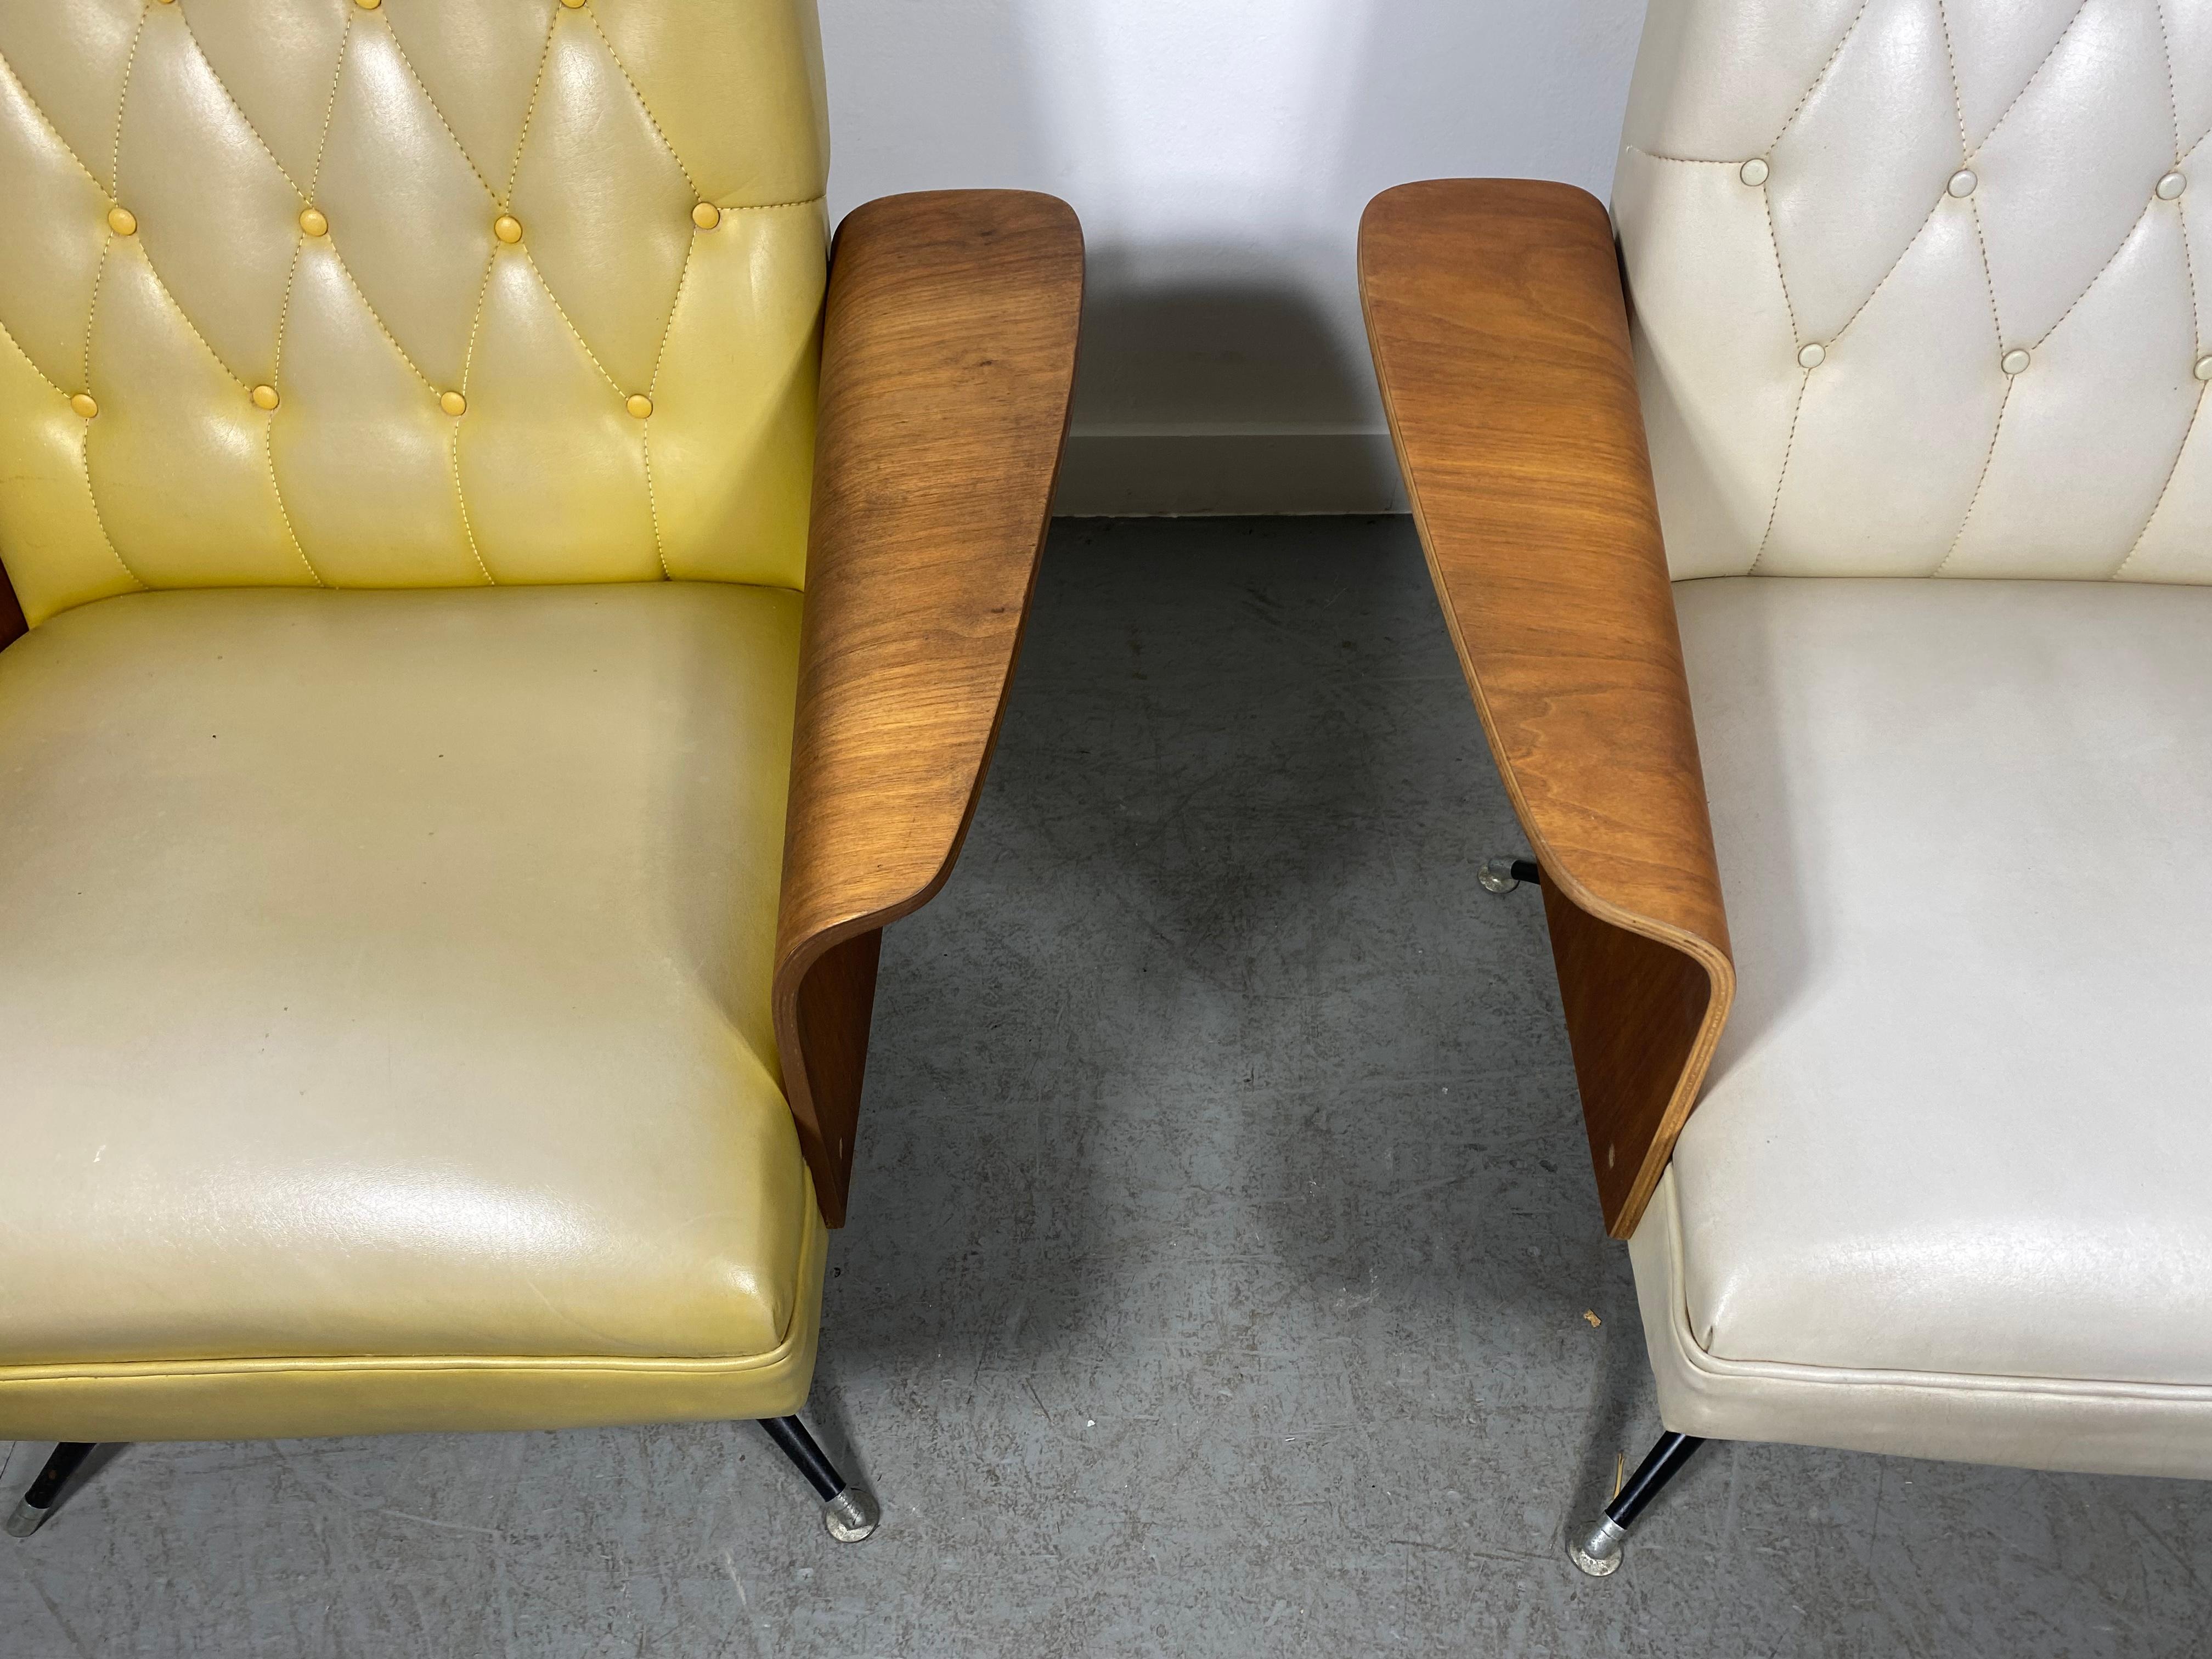 1960s Modernist Tilt / Swivel Lounge Chairs Designed by Murphy Miller, Plycraft In Good Condition For Sale In Buffalo, NY